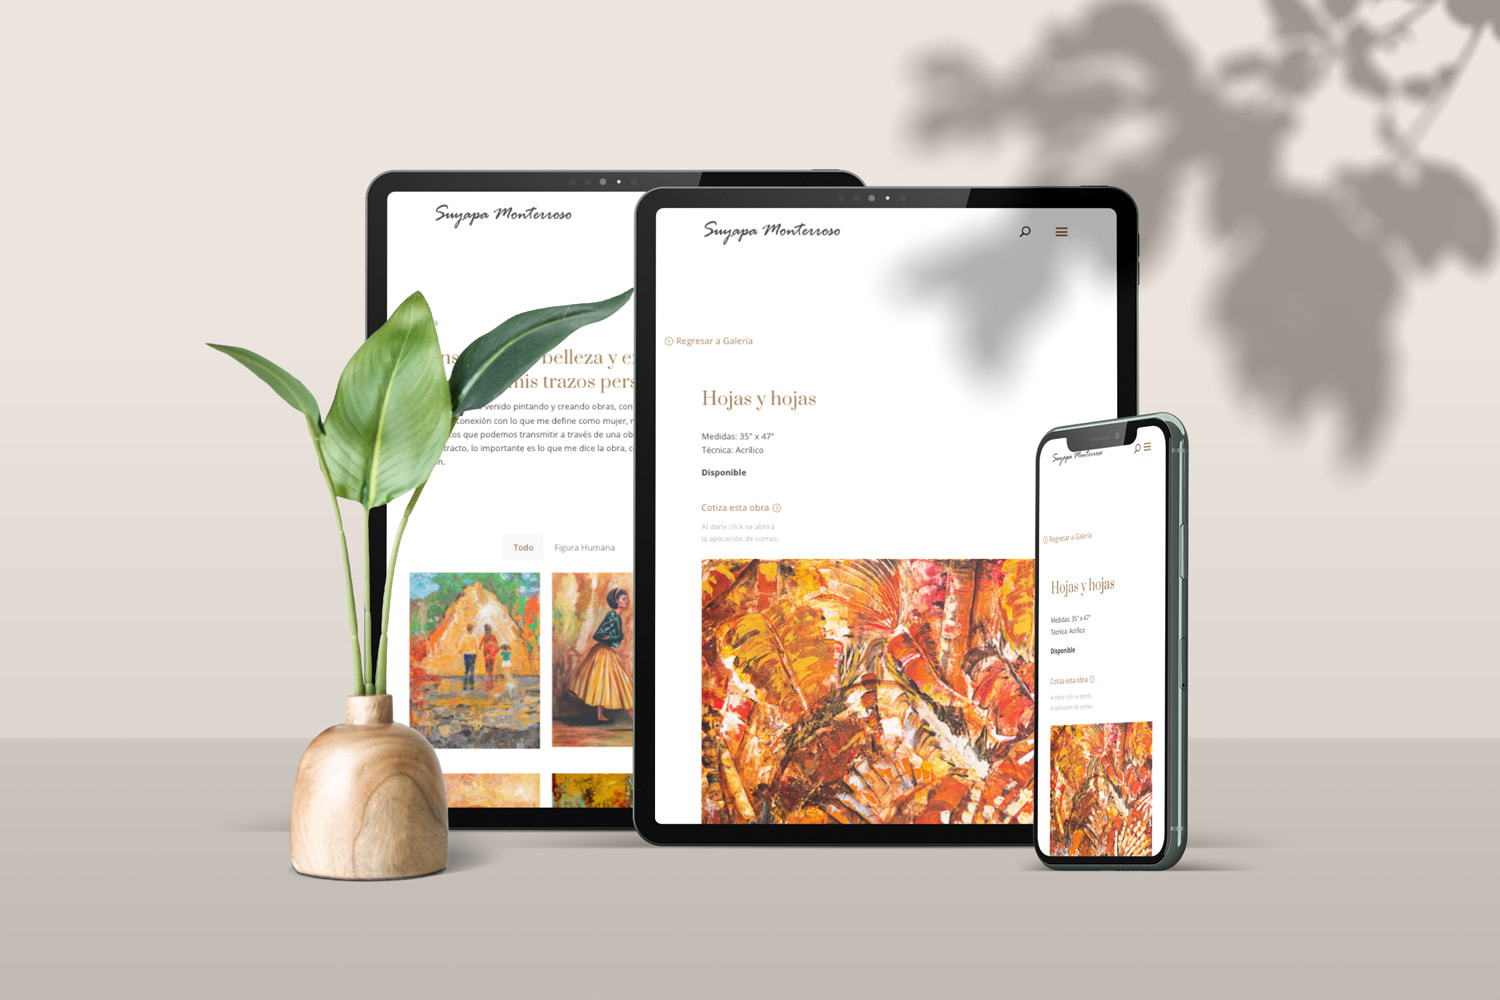 Two tablets and an iphone standing upright showing Suyapa Monterroso Website design and a plant decoration in the front